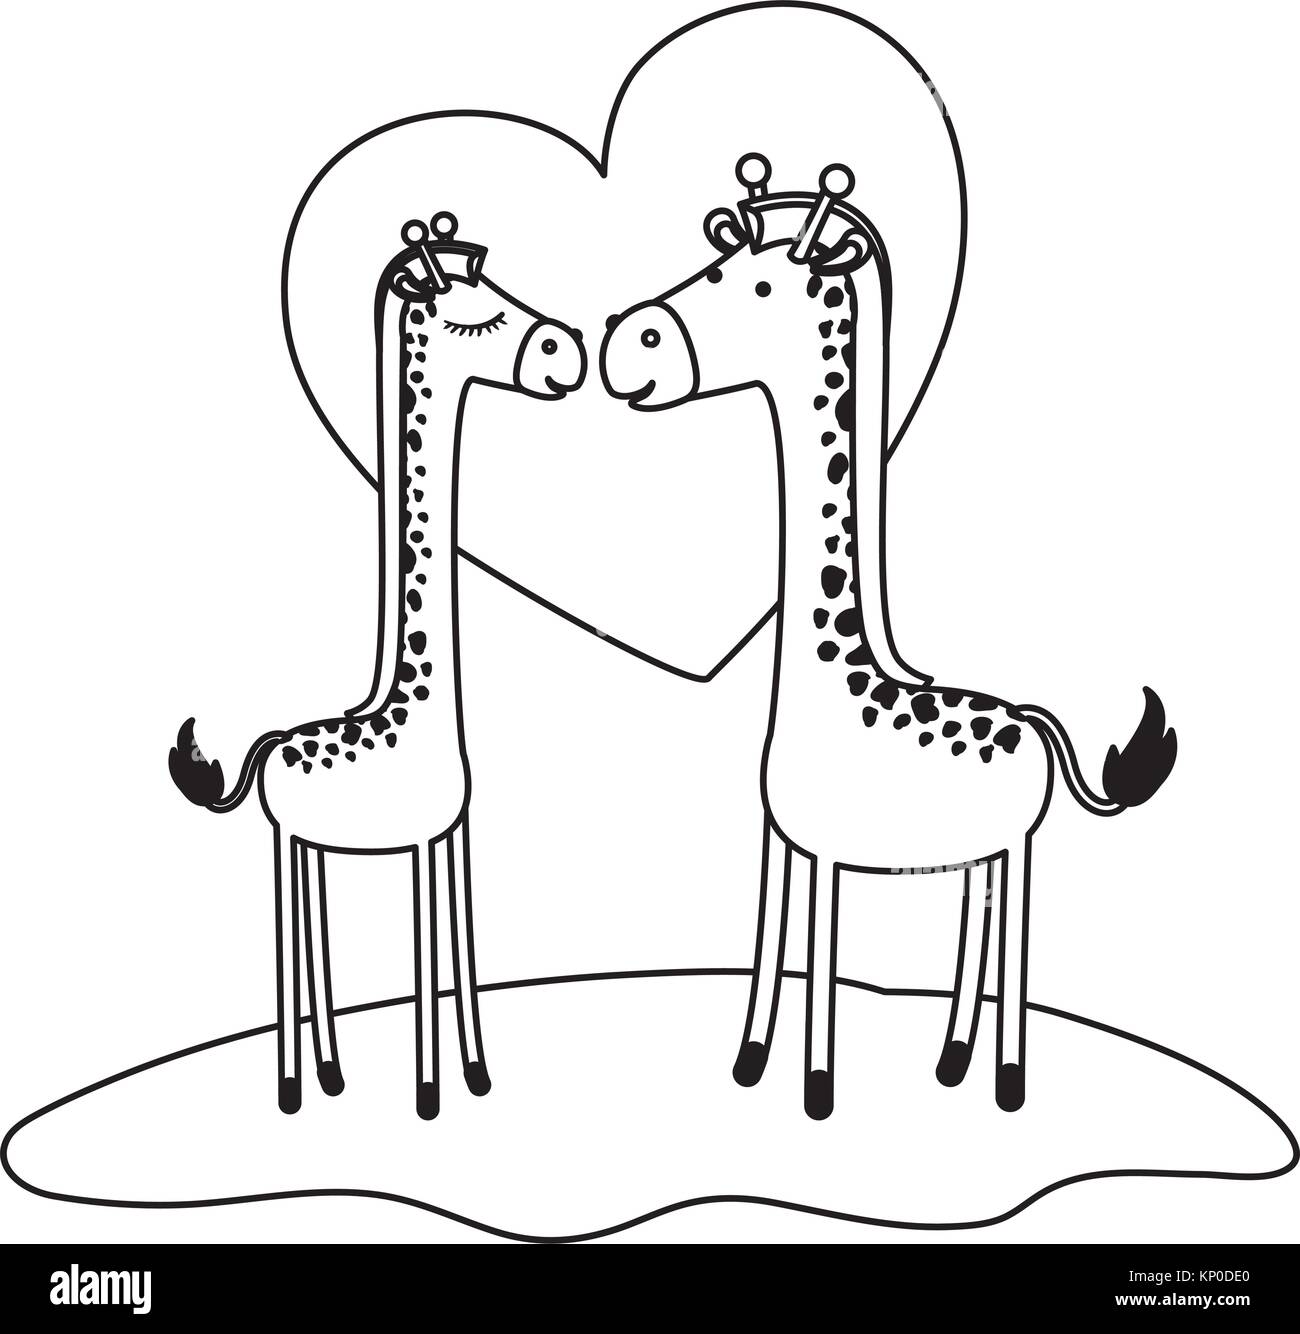 giraffes couple over grass in black sections silhouette with heart in background Stock Vector